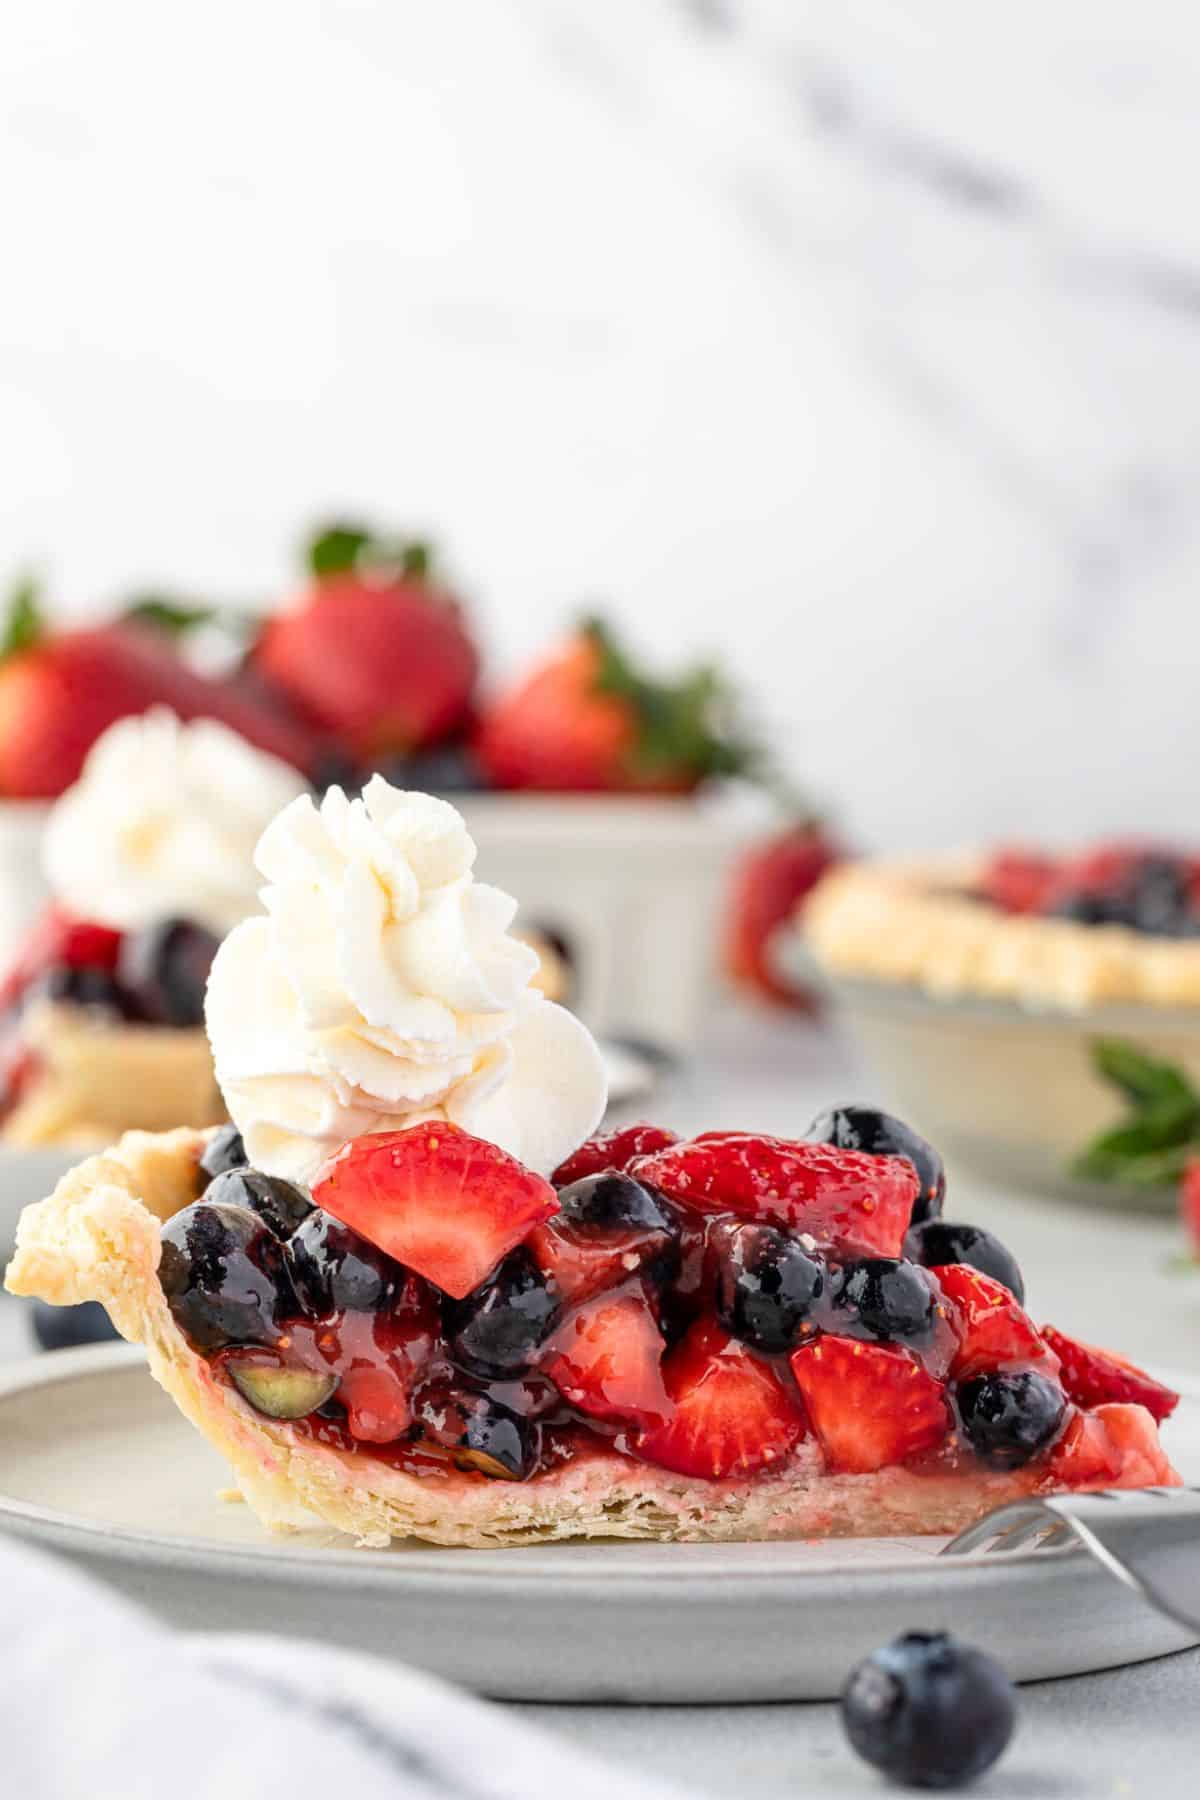 A slice of blueberry strawberry pie topped with whipped cream on a plate, with whole strawberries and blueberries in the background.